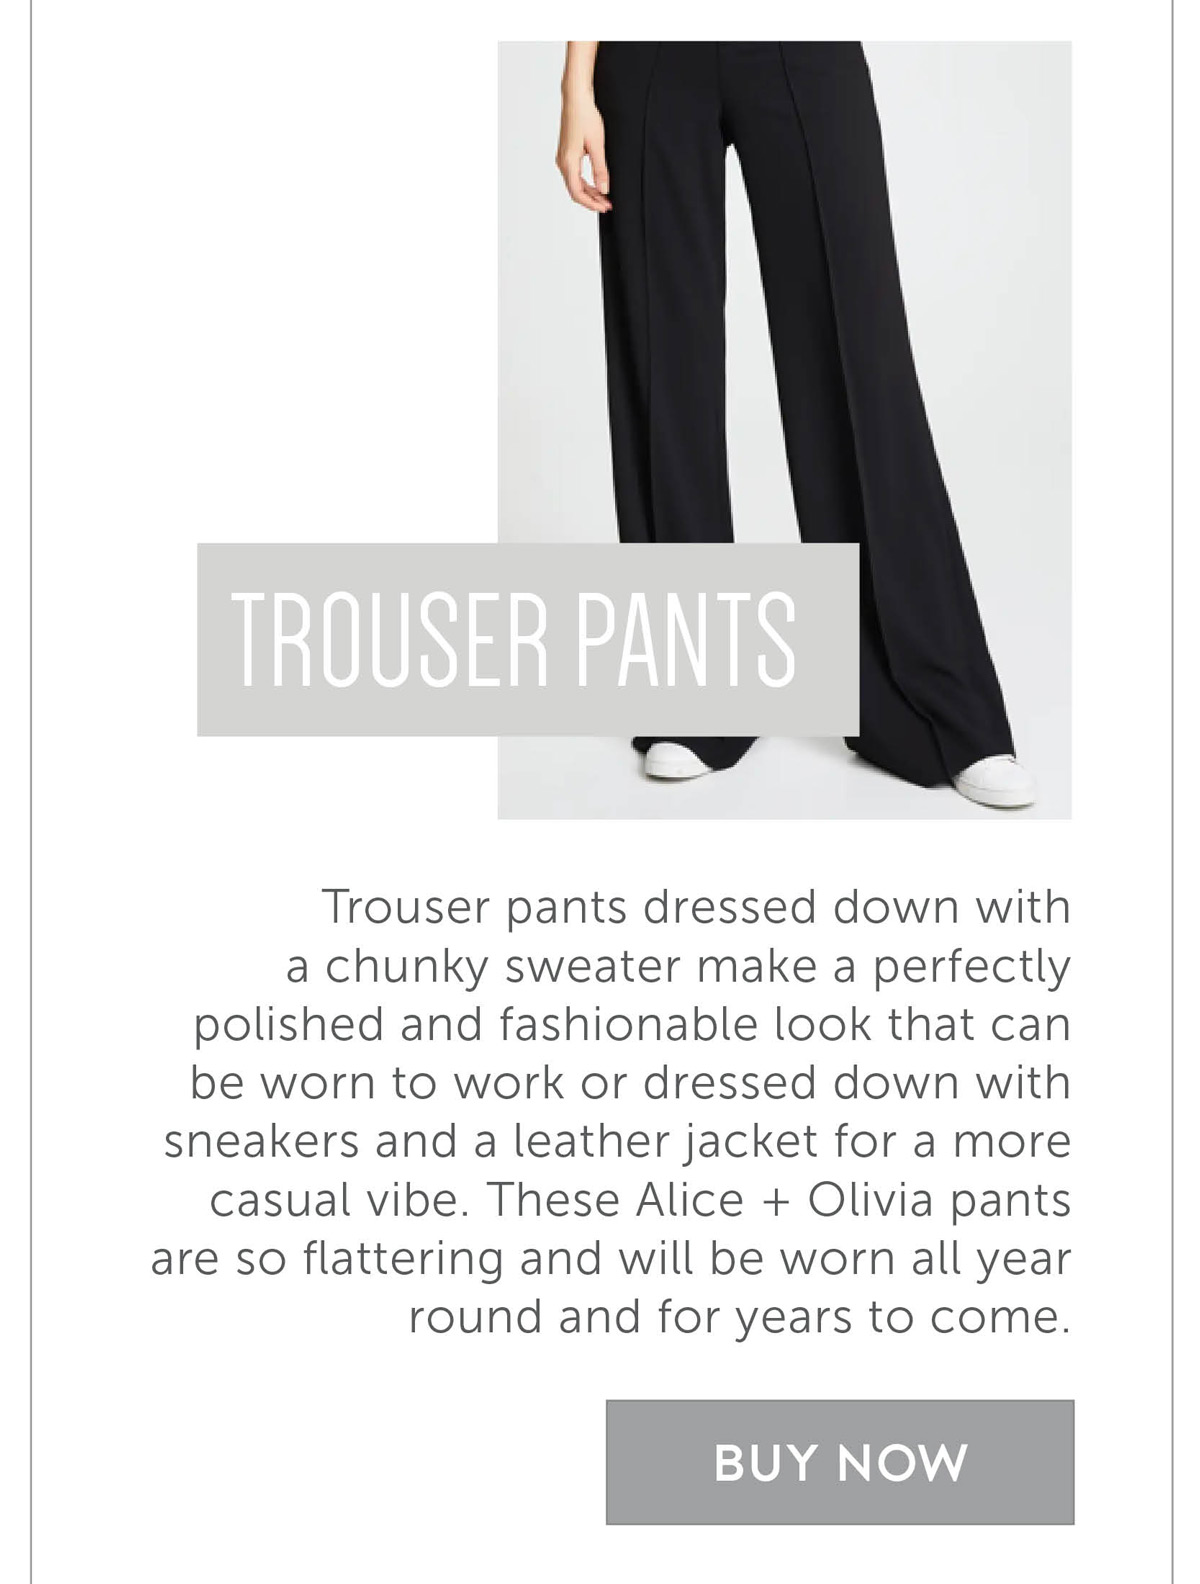 Trouser pants dressed down with a chunky sweater make a perfectly polished and fashionable look that can be worn to work or dressed down with sneakers and a leather jacket for a more casual vibe. These Alice + Olivia pants are so flattering and will be worn all year round and for years to come.